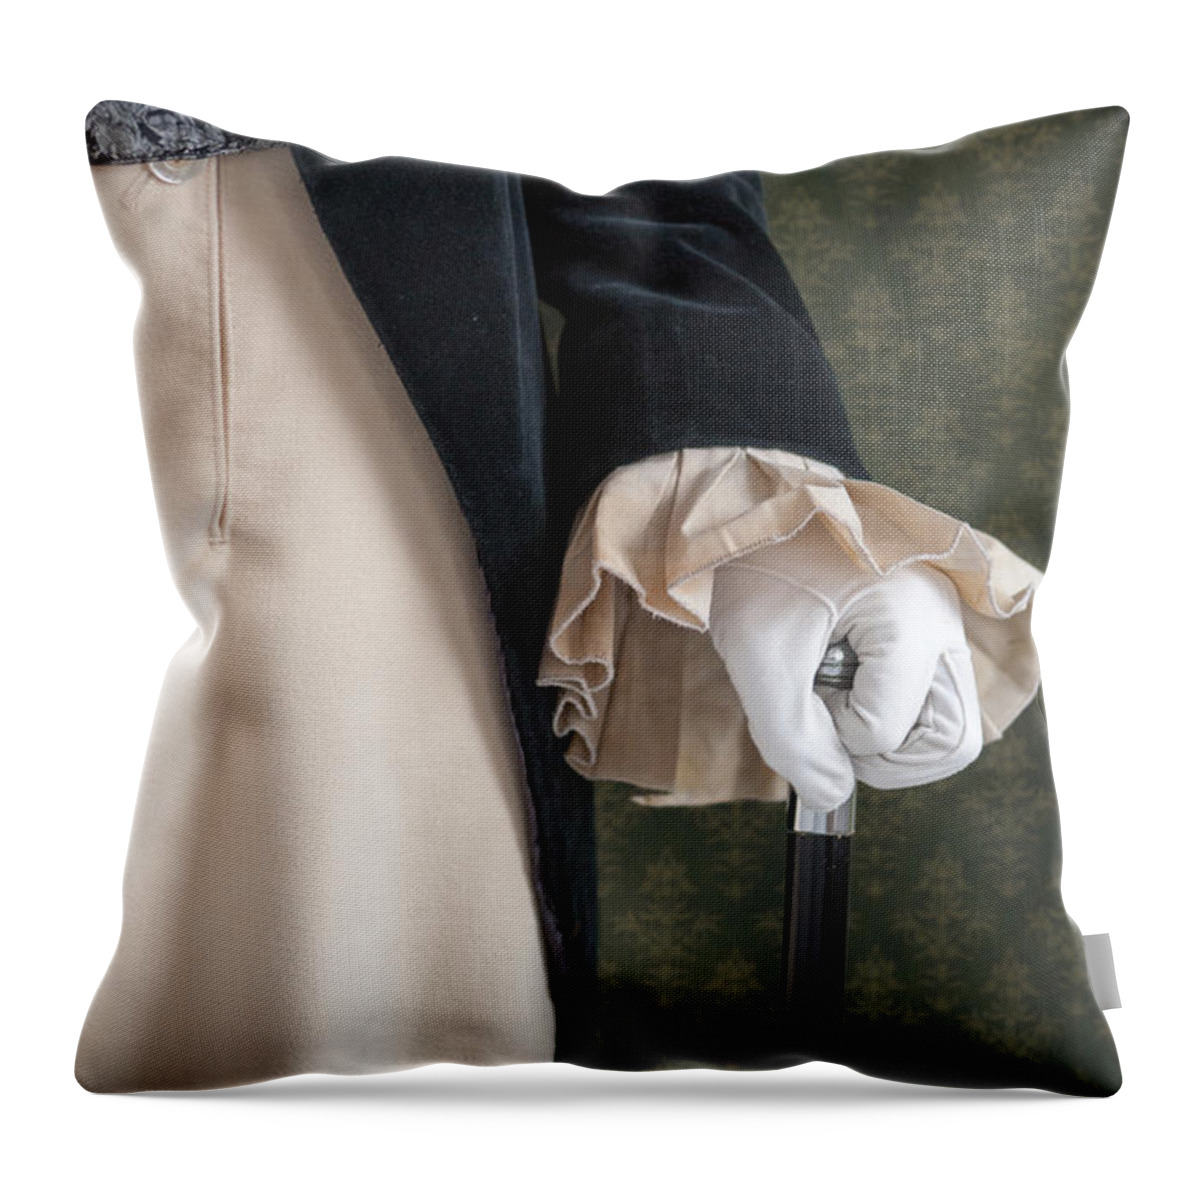 Victorian Throw Pillow featuring the photograph Regency Man Holding A Silver Topped Cane by Lee Avison